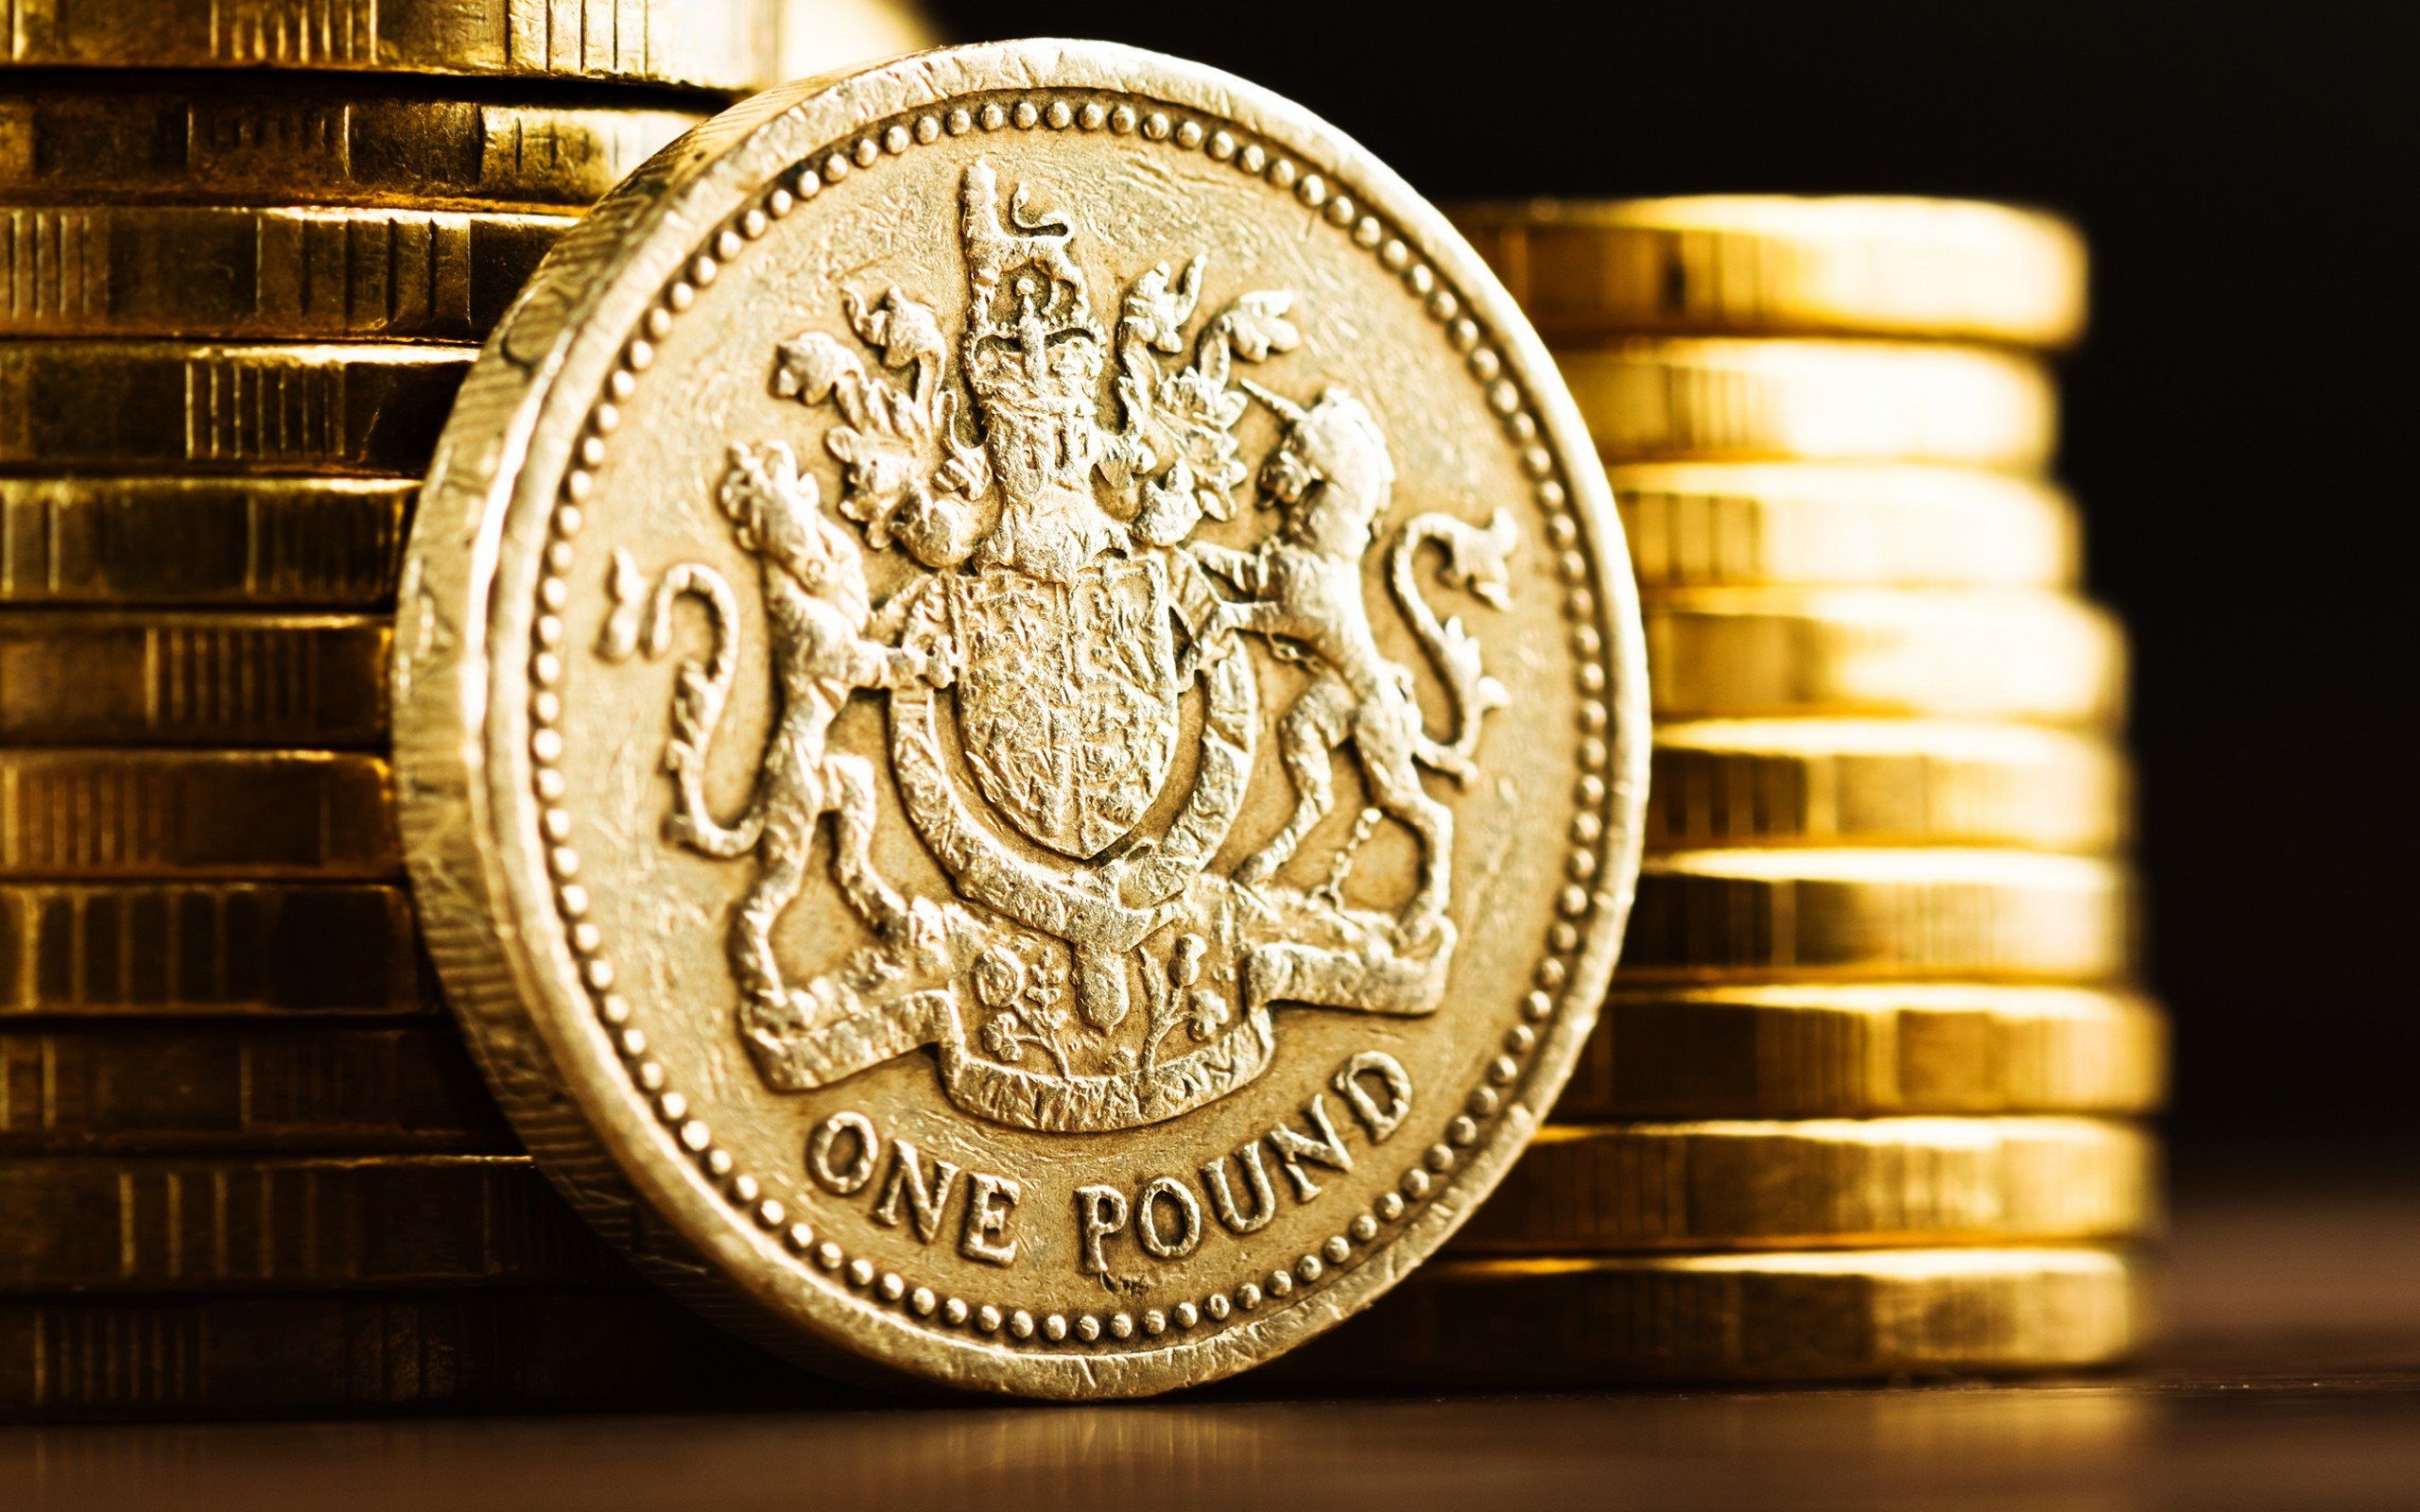 Download wallpaper Pound sterling, Pound, British pound, pound symbol, coins, currency, British money, money for desktop with resolution 2560x1600. High Quality HD picture wallpaper